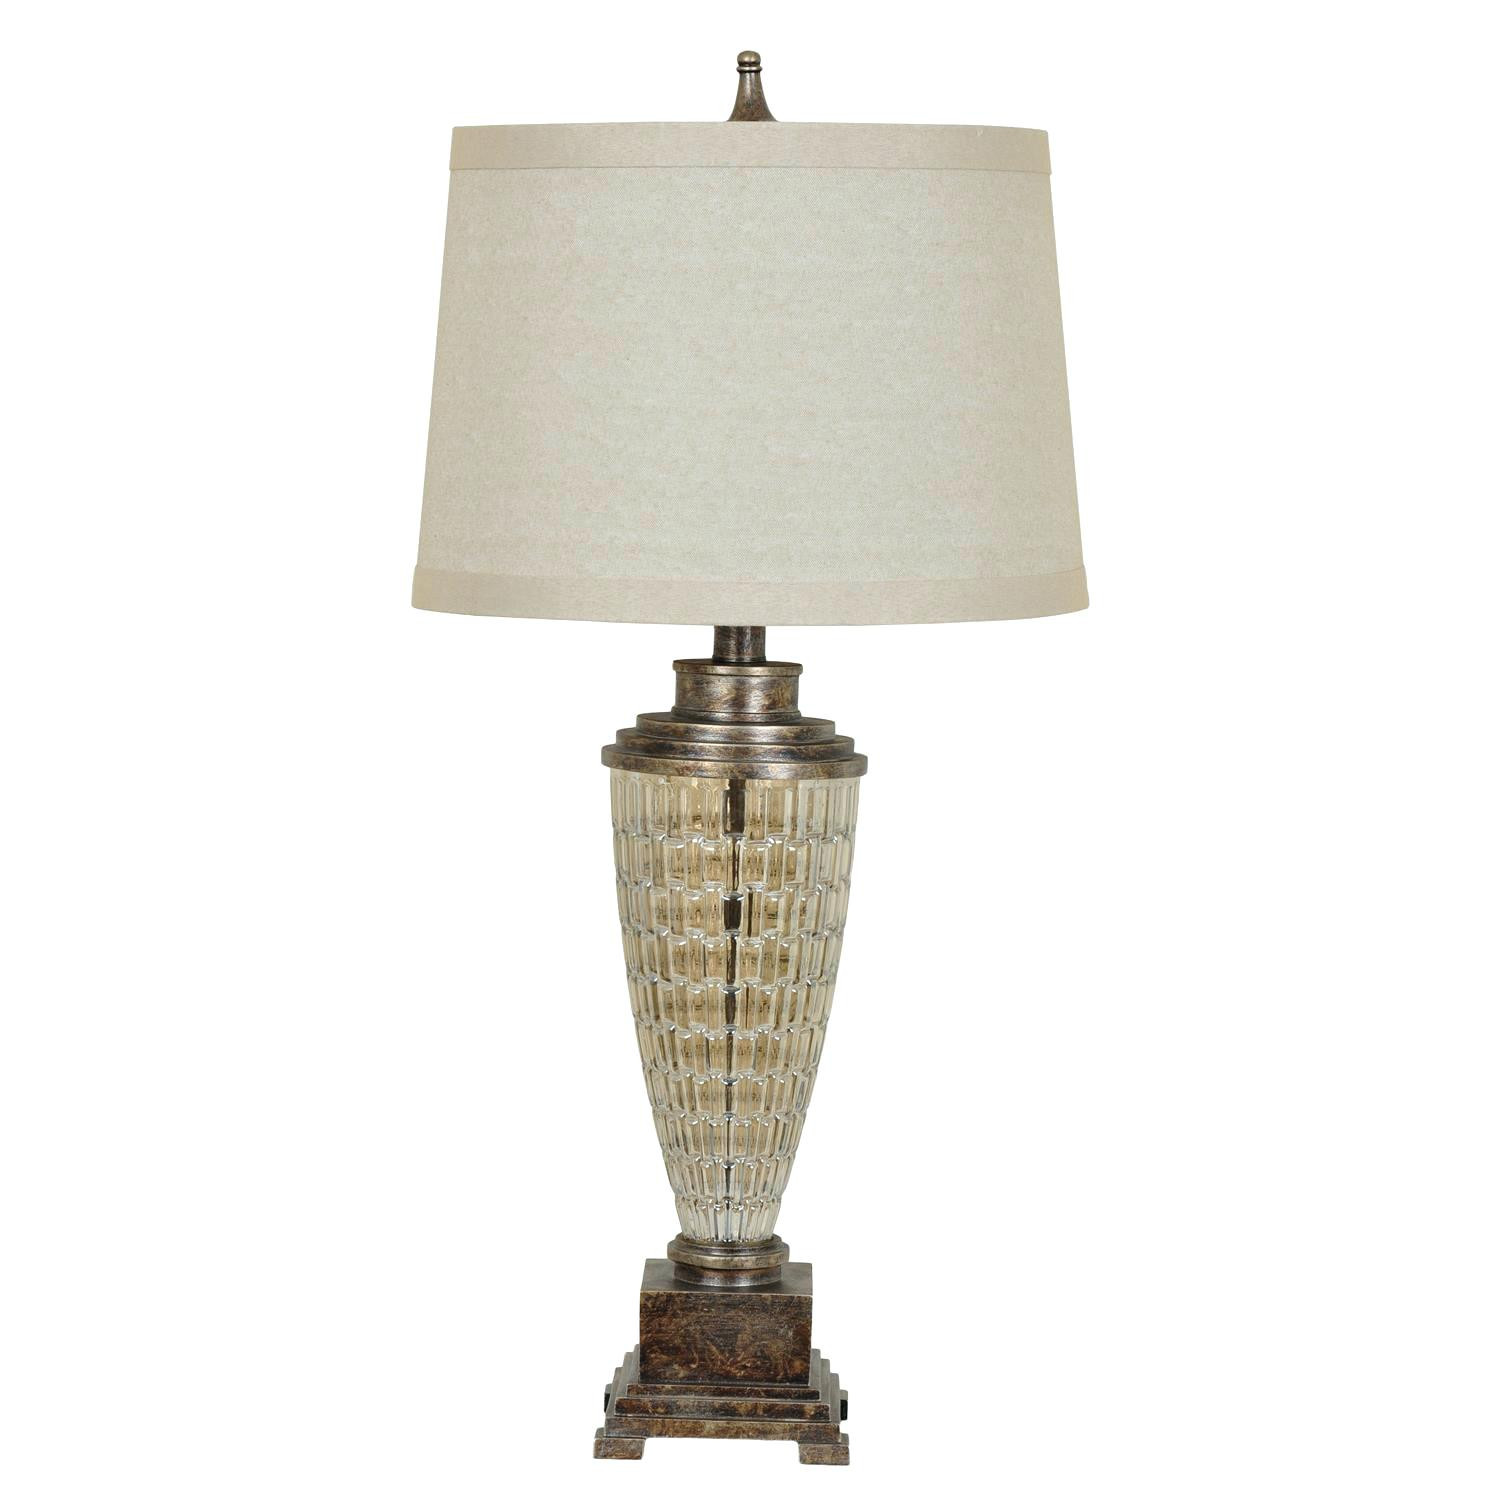 Country Table Lamps Living Room
 Country Style Table Lamps Living Room Rustic Lamps For